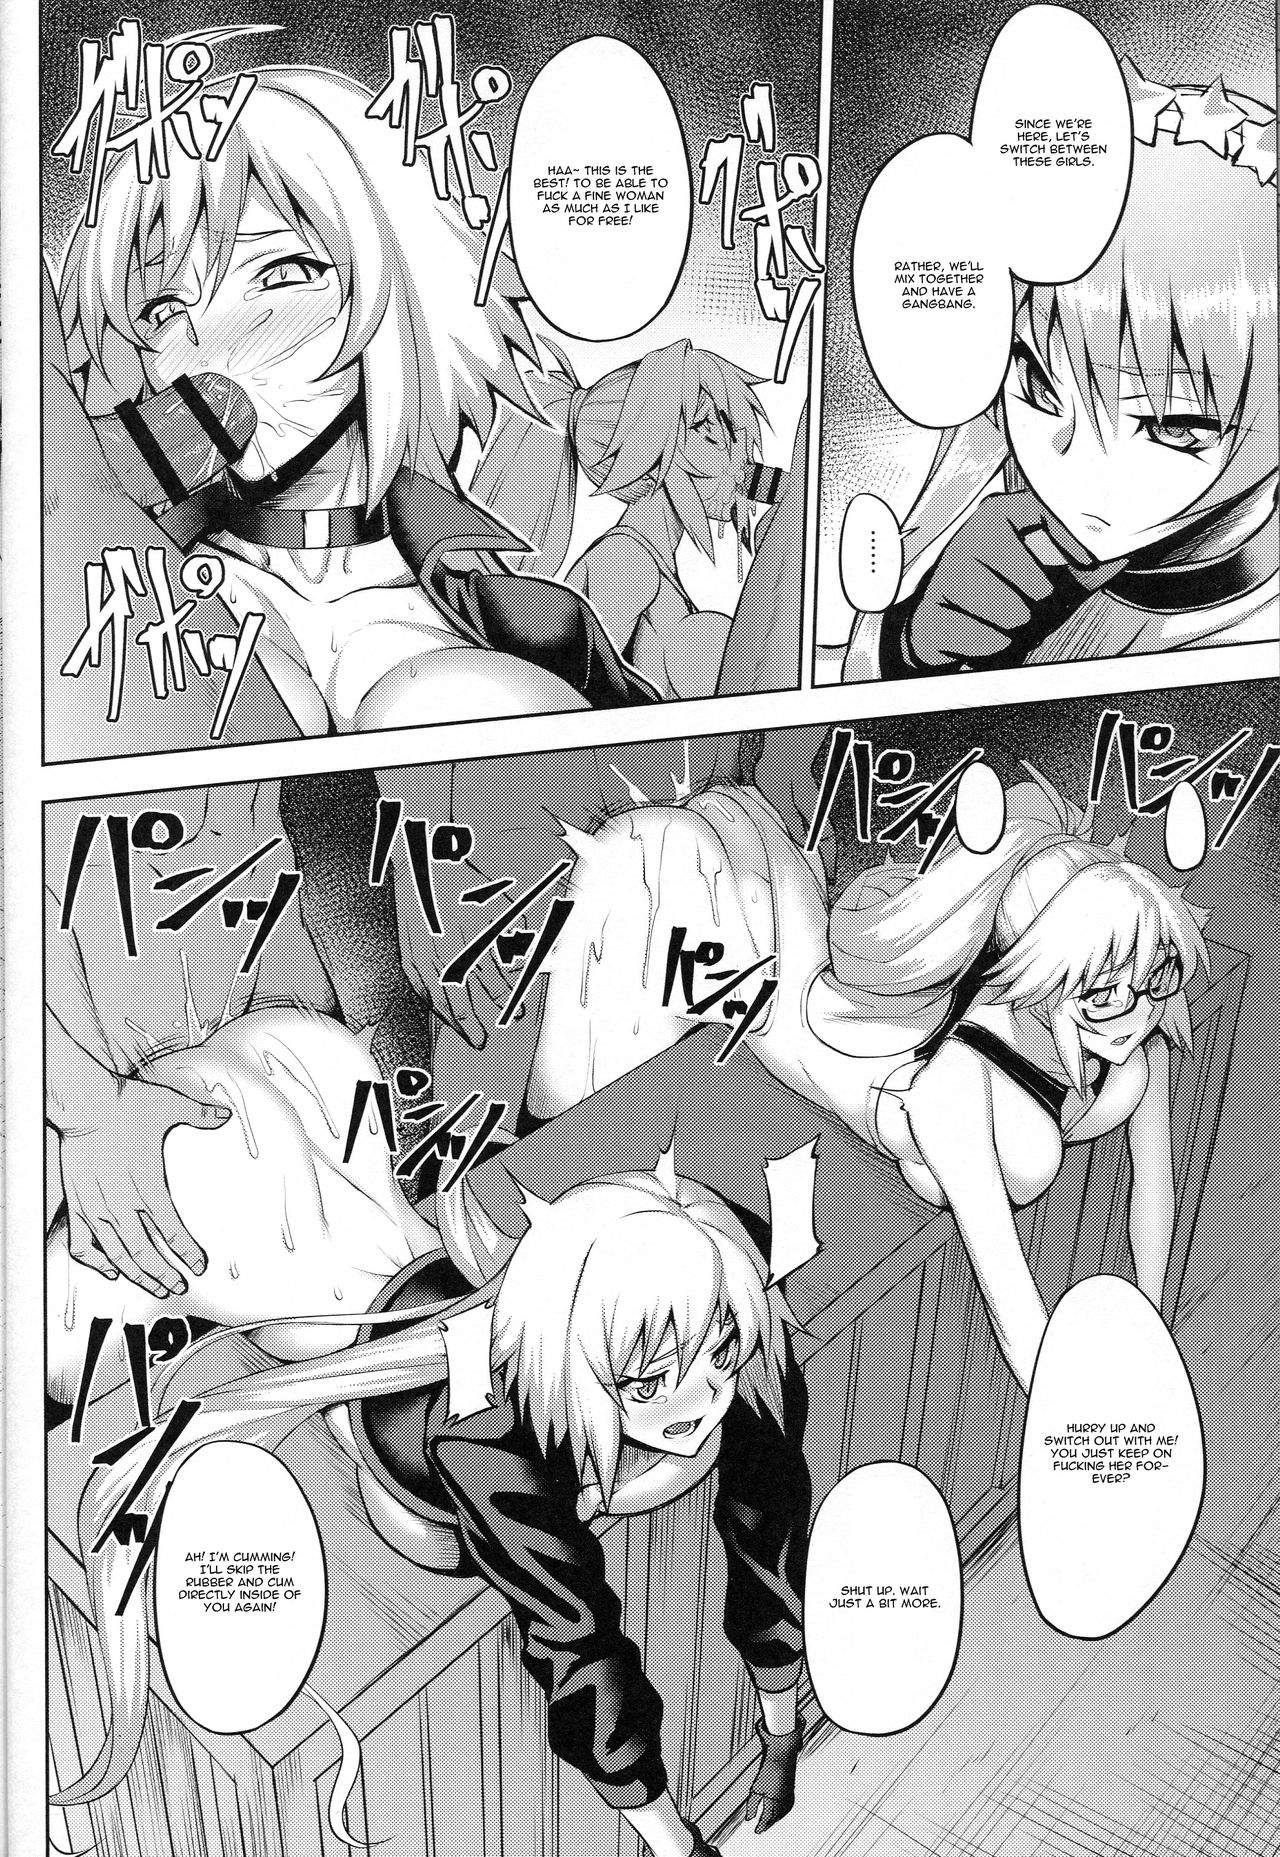 (C95) [Avion Village (Johnny)] ENDLESS VACANCES (Fate/Grand Order) [English] [CGrascal] page 16 full